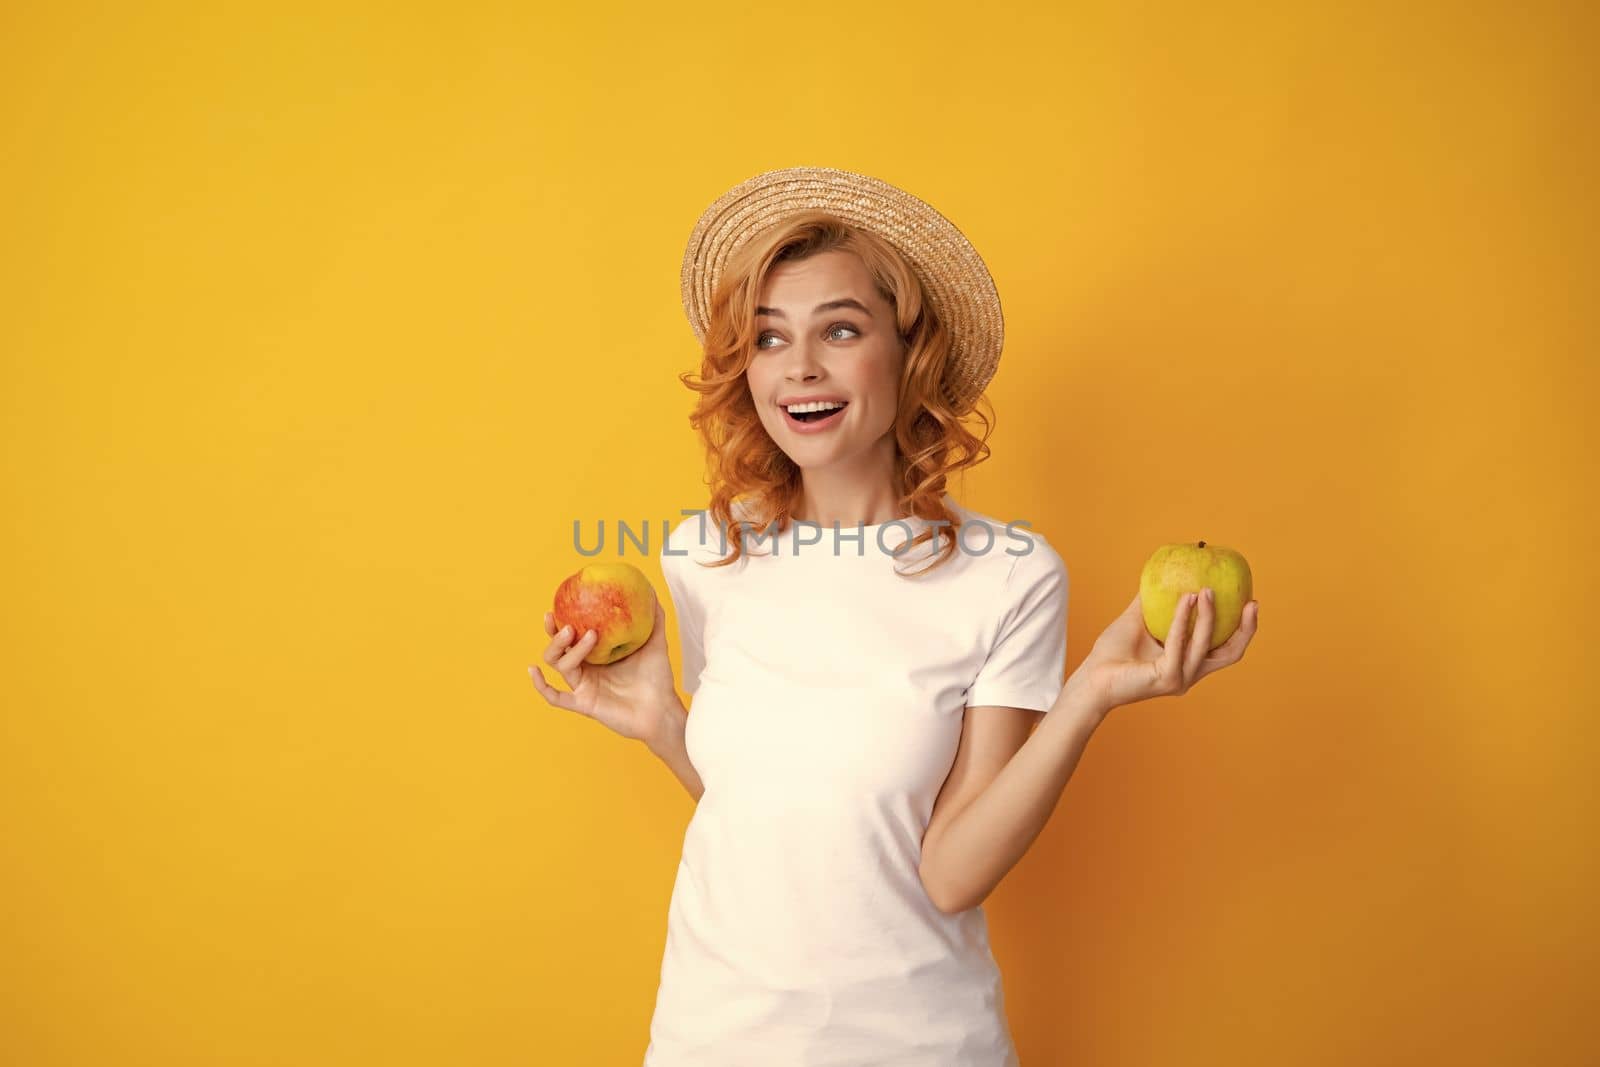 Beautiful smile of young woman holding apple